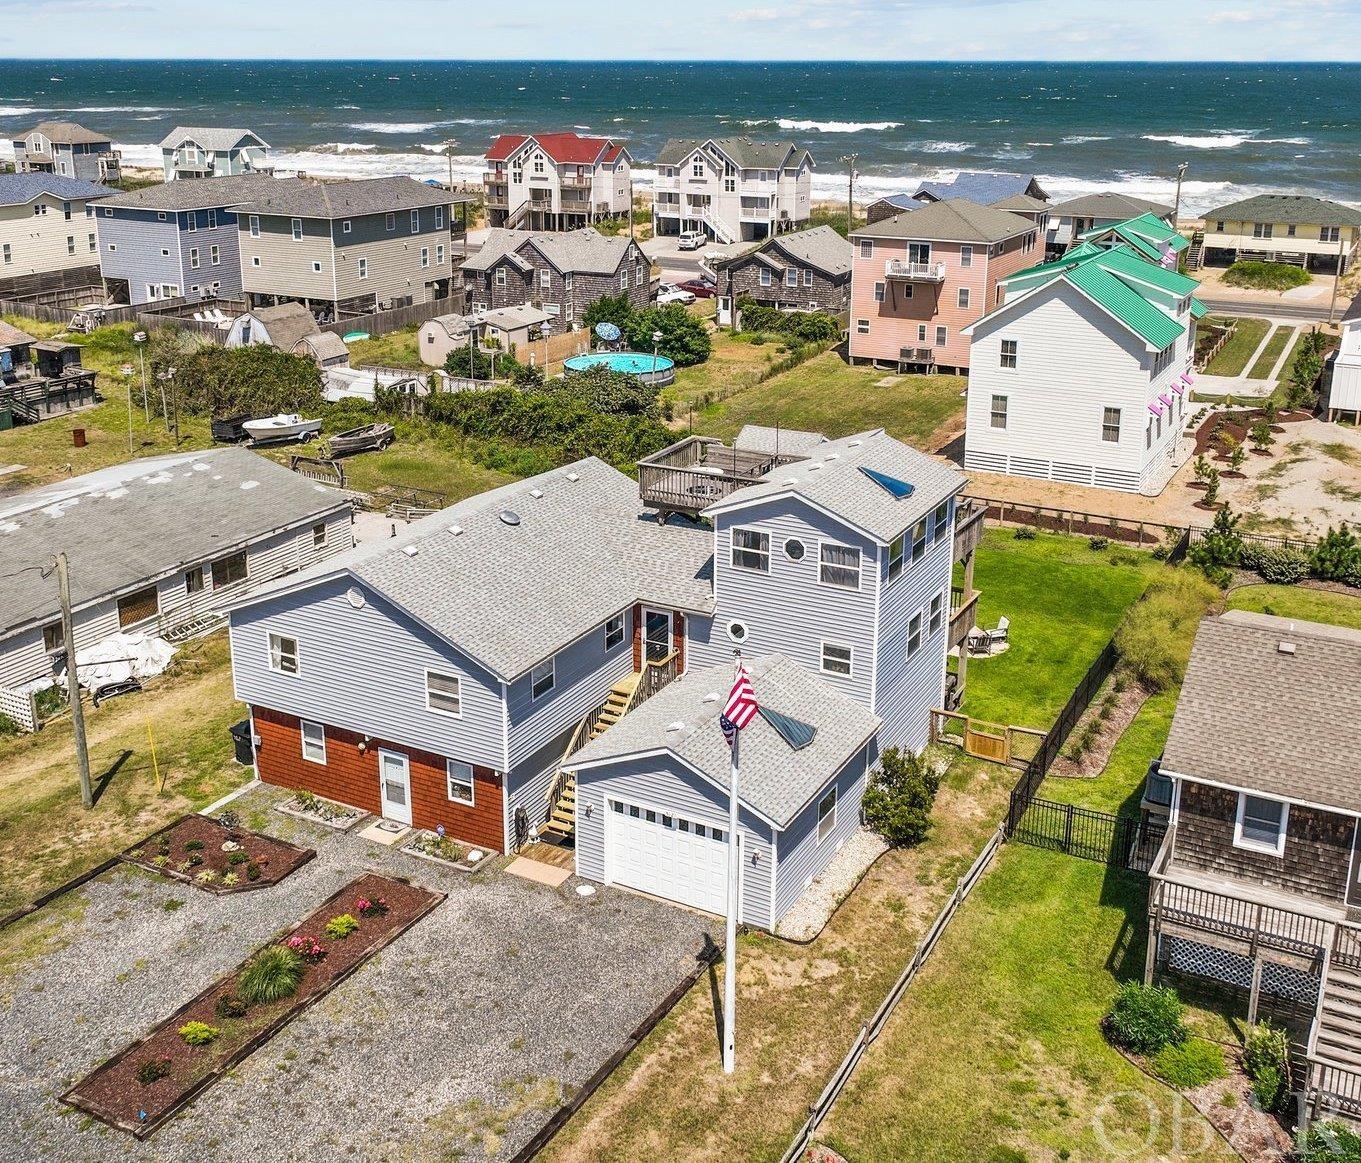 Kitty Hawk property just two lots away from the Oceanfront. Currently zoned BC-2, the opportunities are plentiful! A new ELEVATOR was installed in 2020. This is a legal duplex with two separate meters. Current owner lives on the top level and rents the downstairs as a year round rental. The top level features 3 bedrooms, two are ensuites, one with an ocean view. There is also a bonus room/game room on this level for whatever best fits your needs.  A 19x15 ship's watch room is currently used as an office. The office has access to both a deck and an exterior crows nest with water views.  Sunrise and sunsets have been enjoyed from this special location. There is a spacious open concept kitchen, dining and living room. Newly added rear deck for enjoying ocean breeze and OBX sunshine. Lower level apartment features 2 bedrooms, 1 bathroom, kitchen, living room and dining area. Lower level apartment was recently renovated including all new bathroom, flooring, paint, trim. There is a large 40x17 garage. An additional side workshop area with built-ins is a handy person's dream come true..  Extensive list of updates and upgrades available for review.  The rear yard is fenced and beautifully landscaped.. The property is just ½ block from two beach accesses, one of which currently has a lifeguard stand during the Summer at Byrd Street. The other is Fonck St. Recent updates include: Flooring, elevator, paint, landscape, irrigation, doors, decks, stairs, security, apartment bathroom and kitchen updates and more. New Roof 2013 per previous owner. A full list of updates are available for review. Ensuite bedroom and the office have split system HVAC. Current downstairs tenant pays $1525 month lease ends Nov. 30 2023.